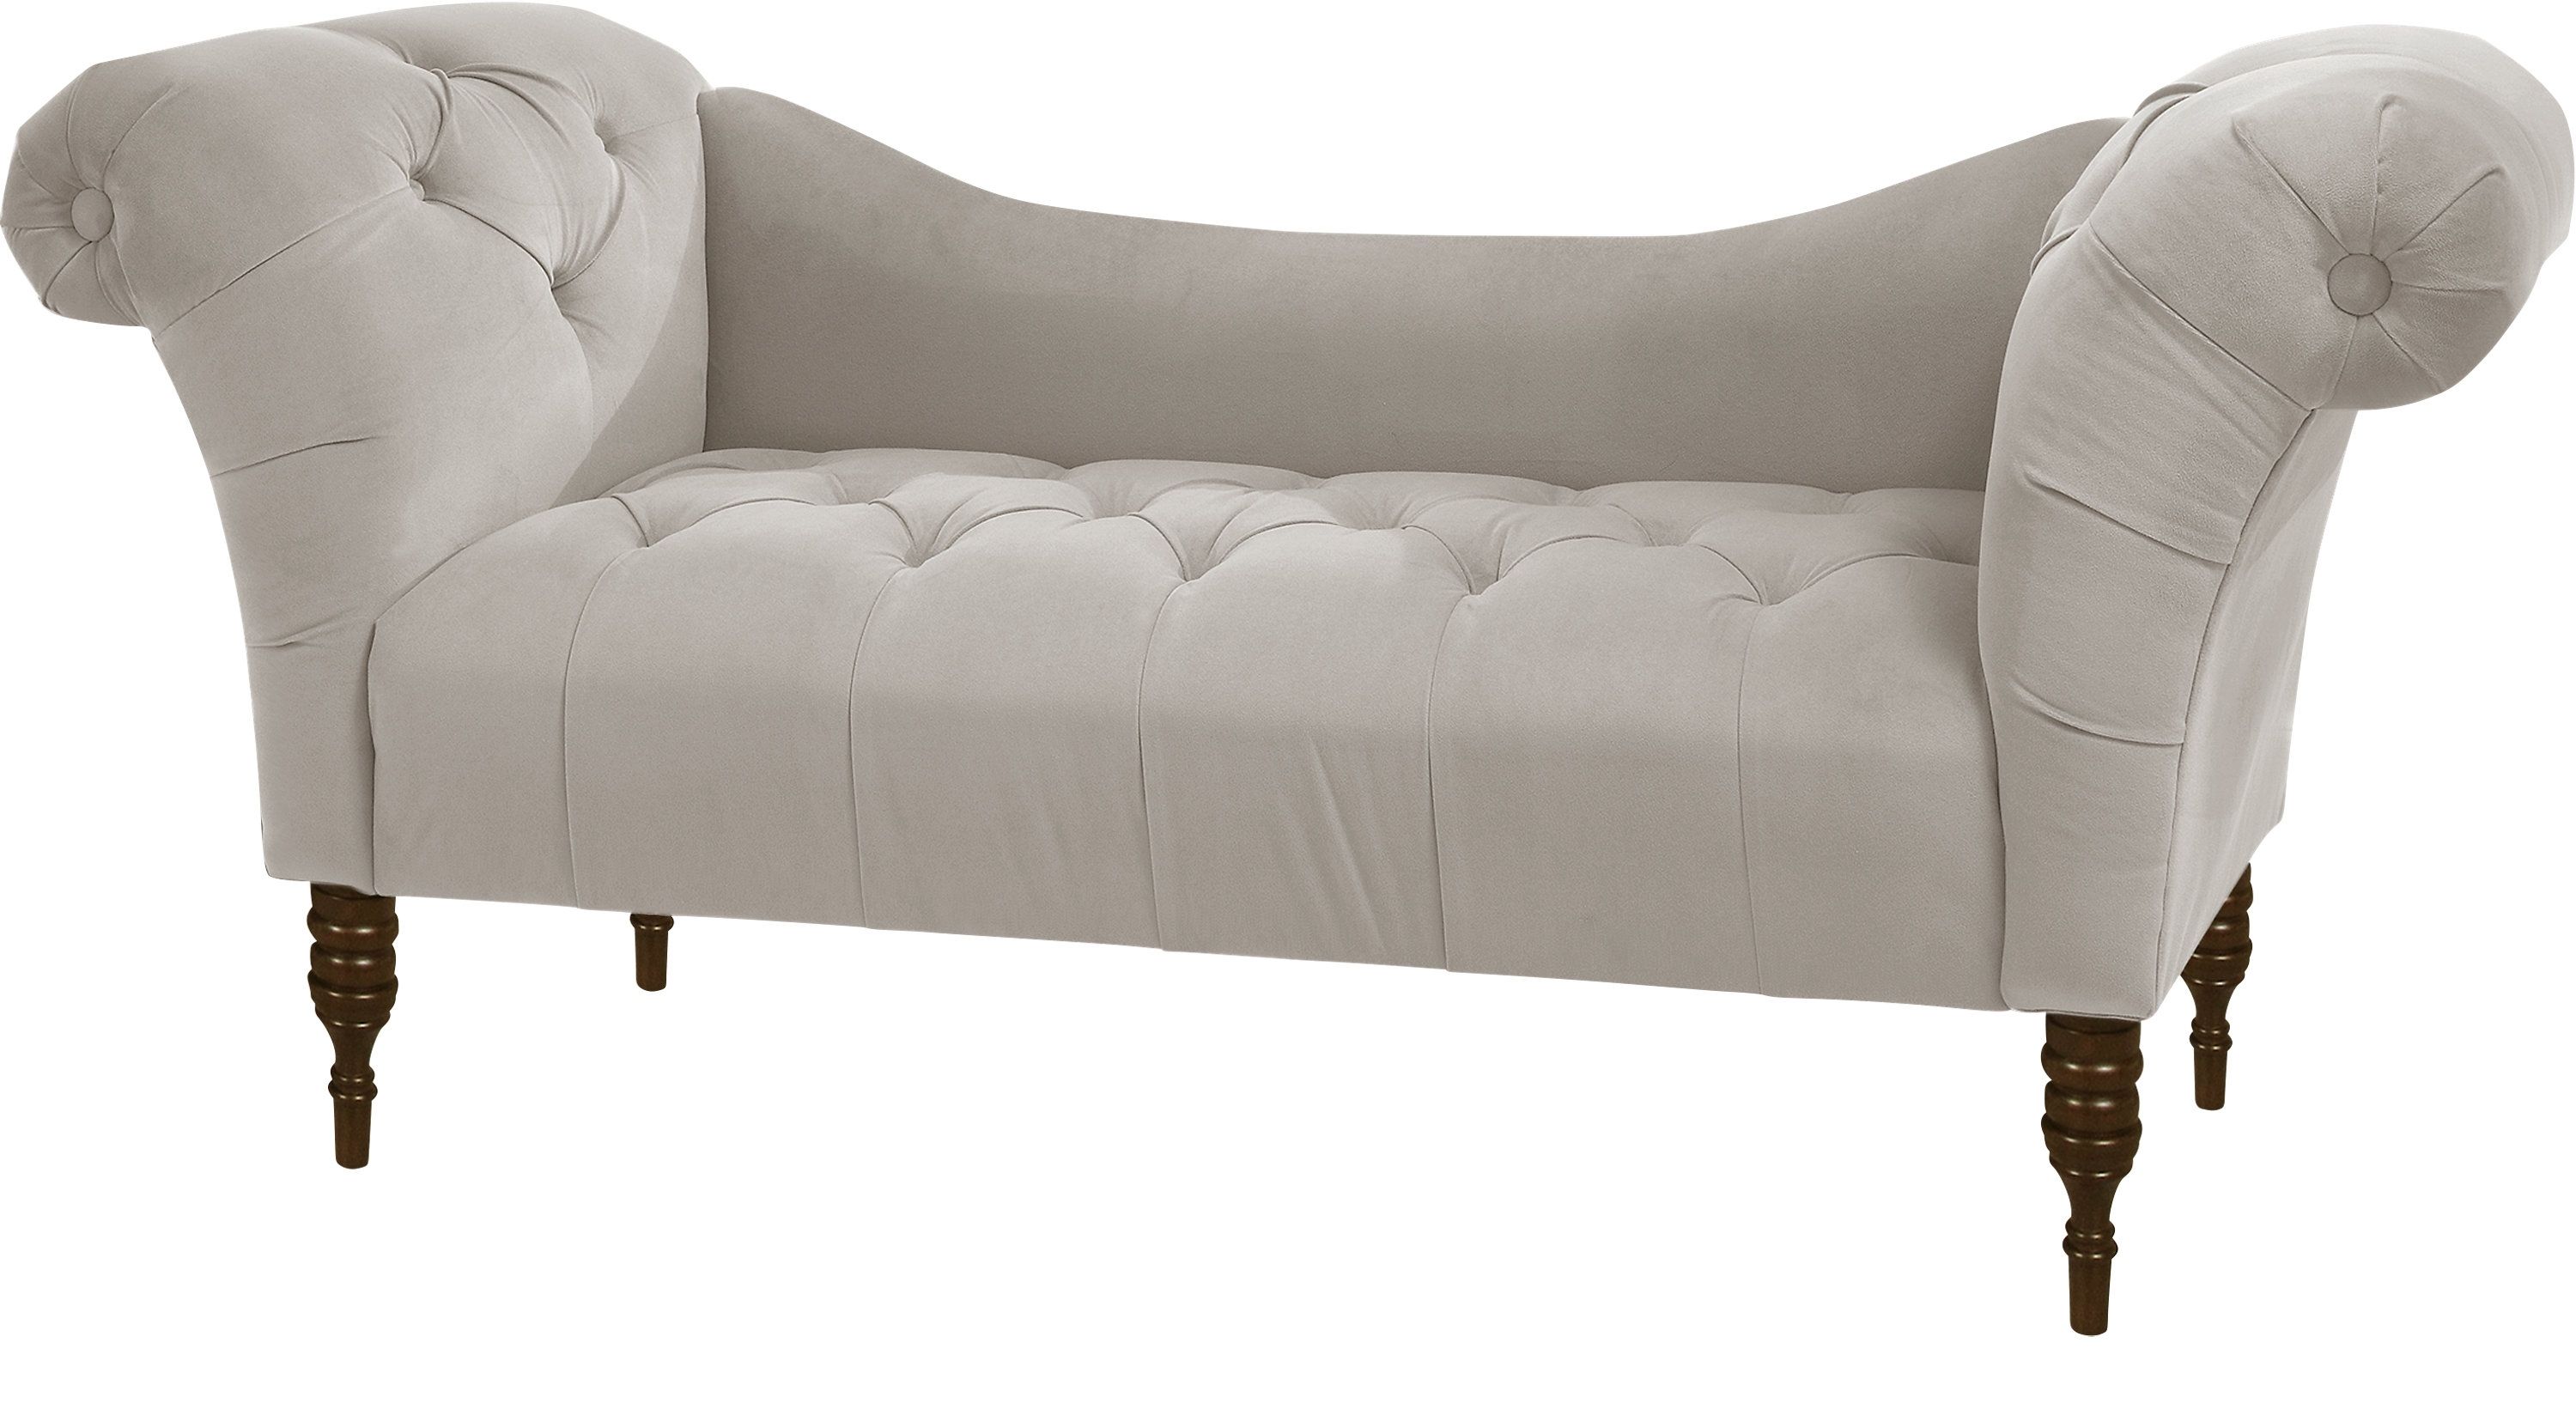 Chaise Accent Bench Or Lounge Pertaining To Fashionable Accent Chaises (View 5 of 15)